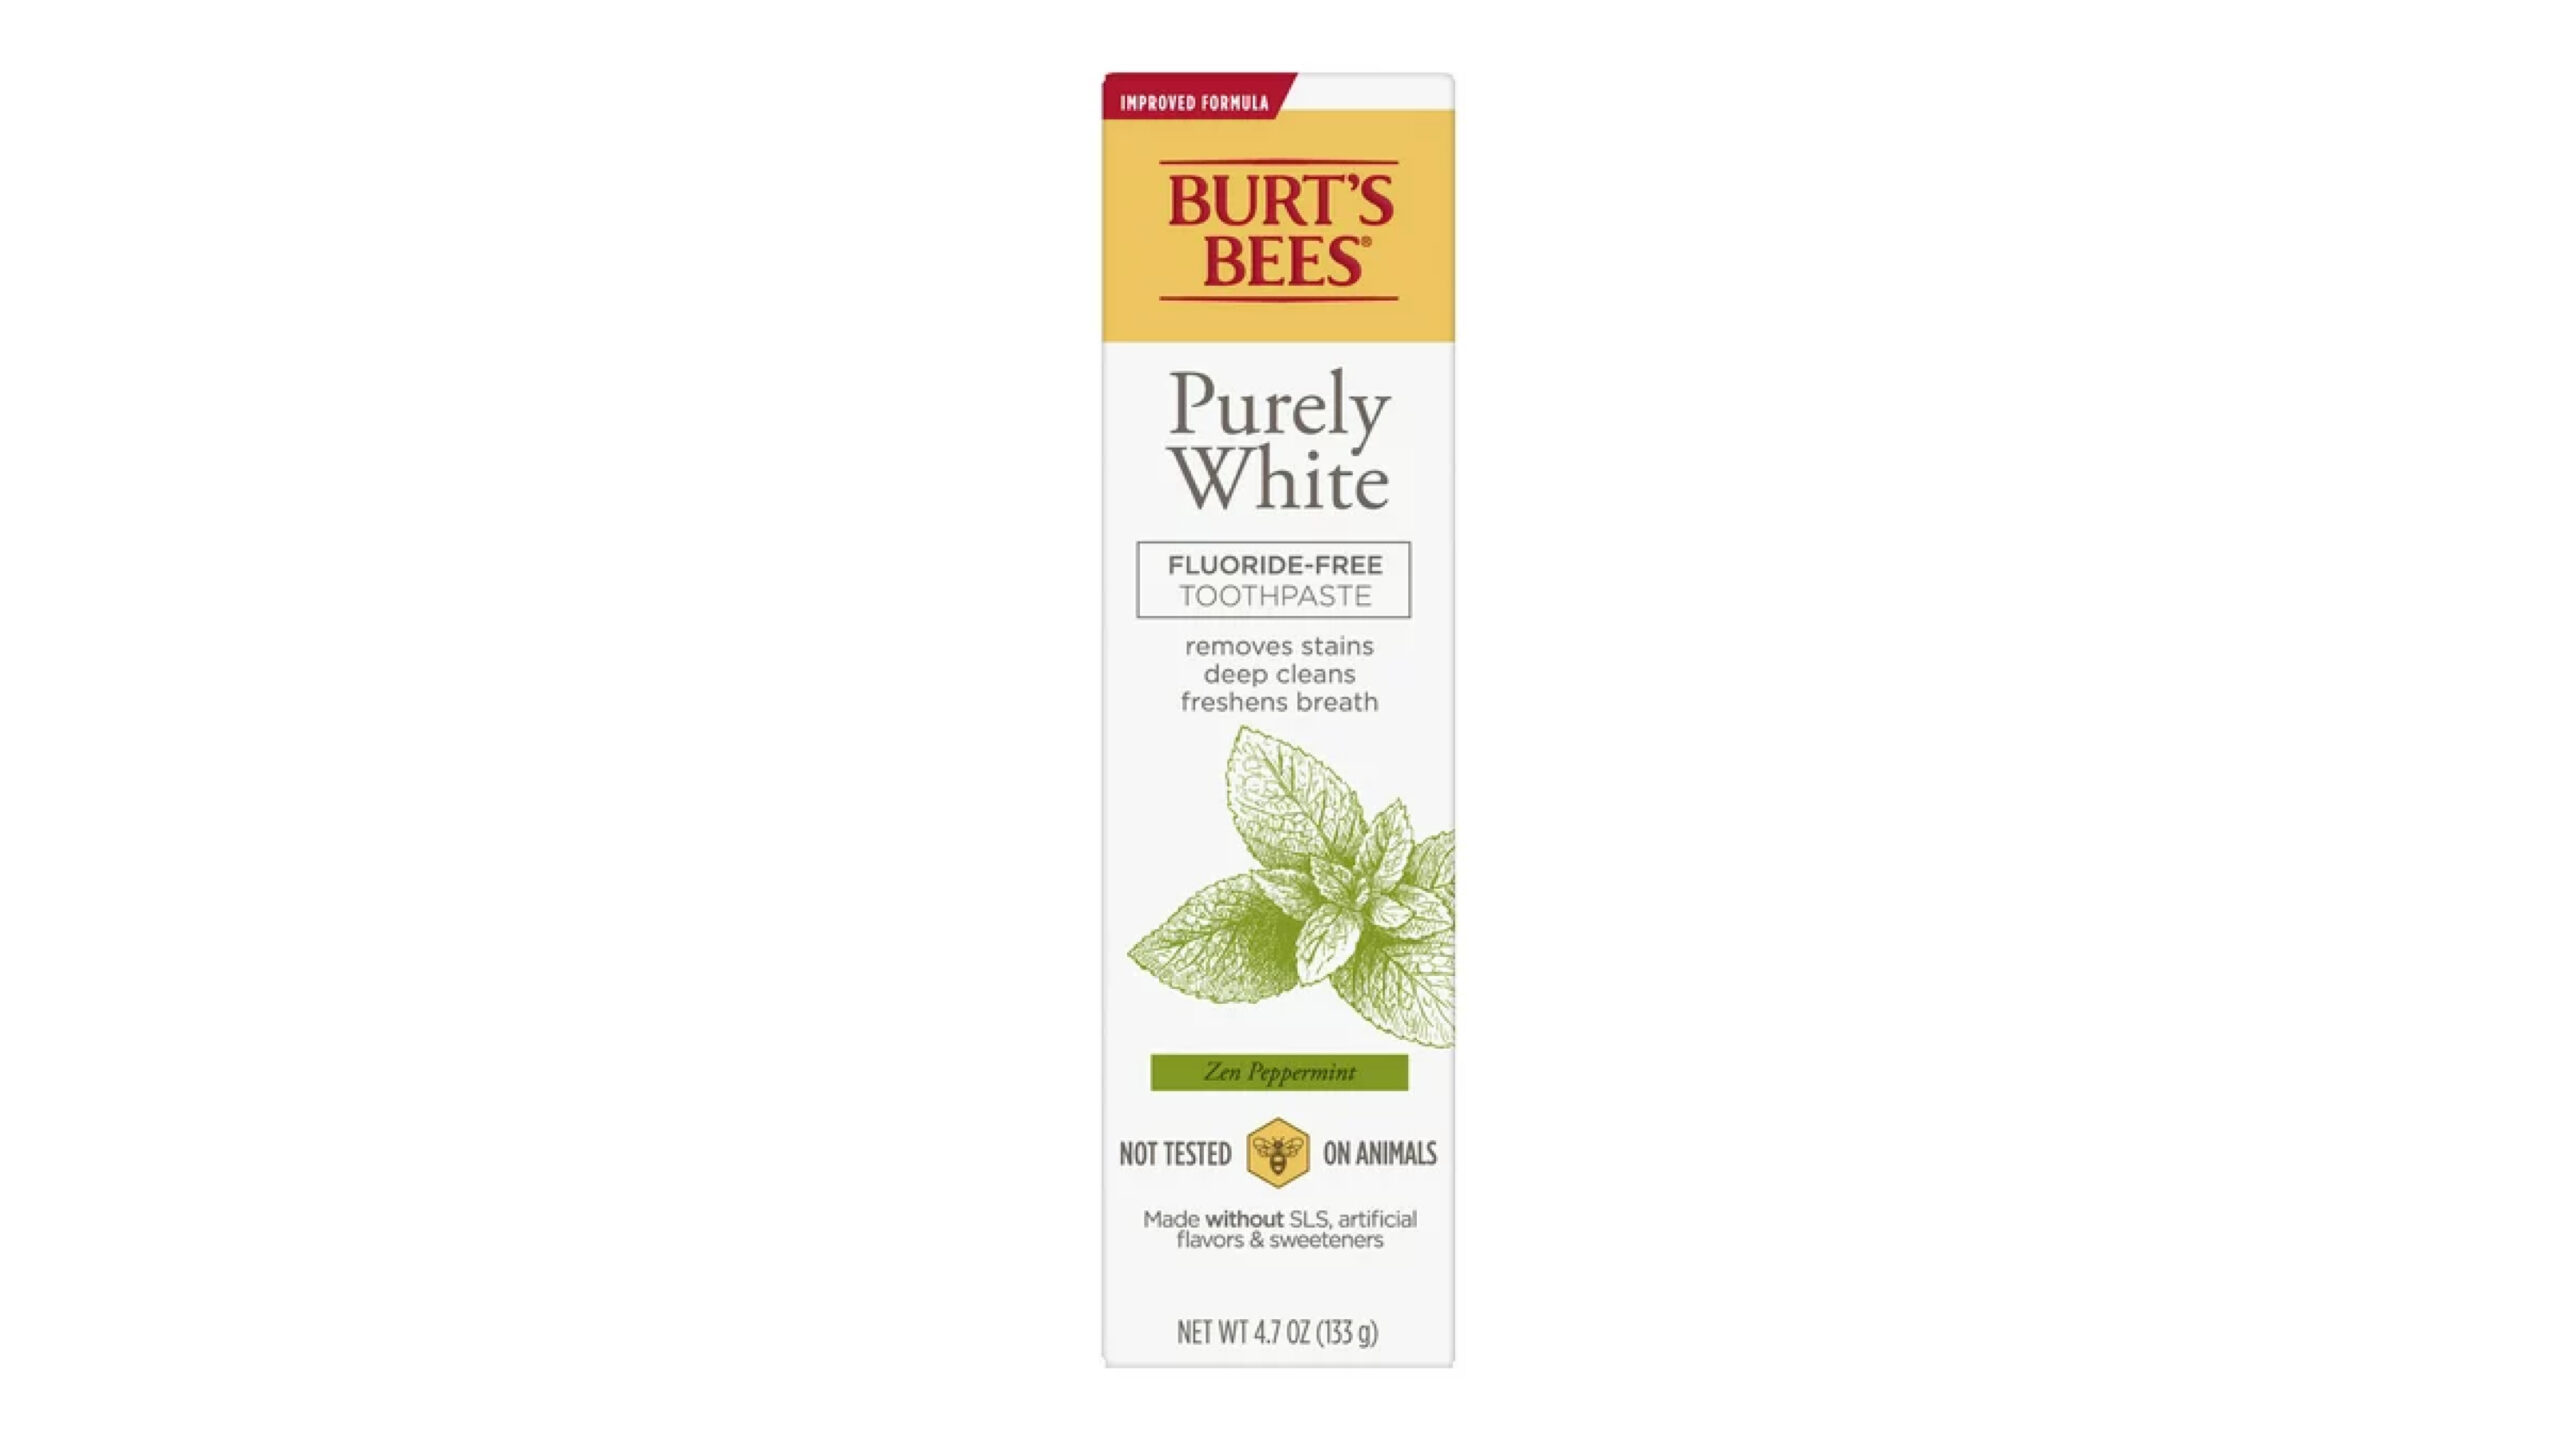 packet of burts bees toothpaste purely white flouride free toothpaste